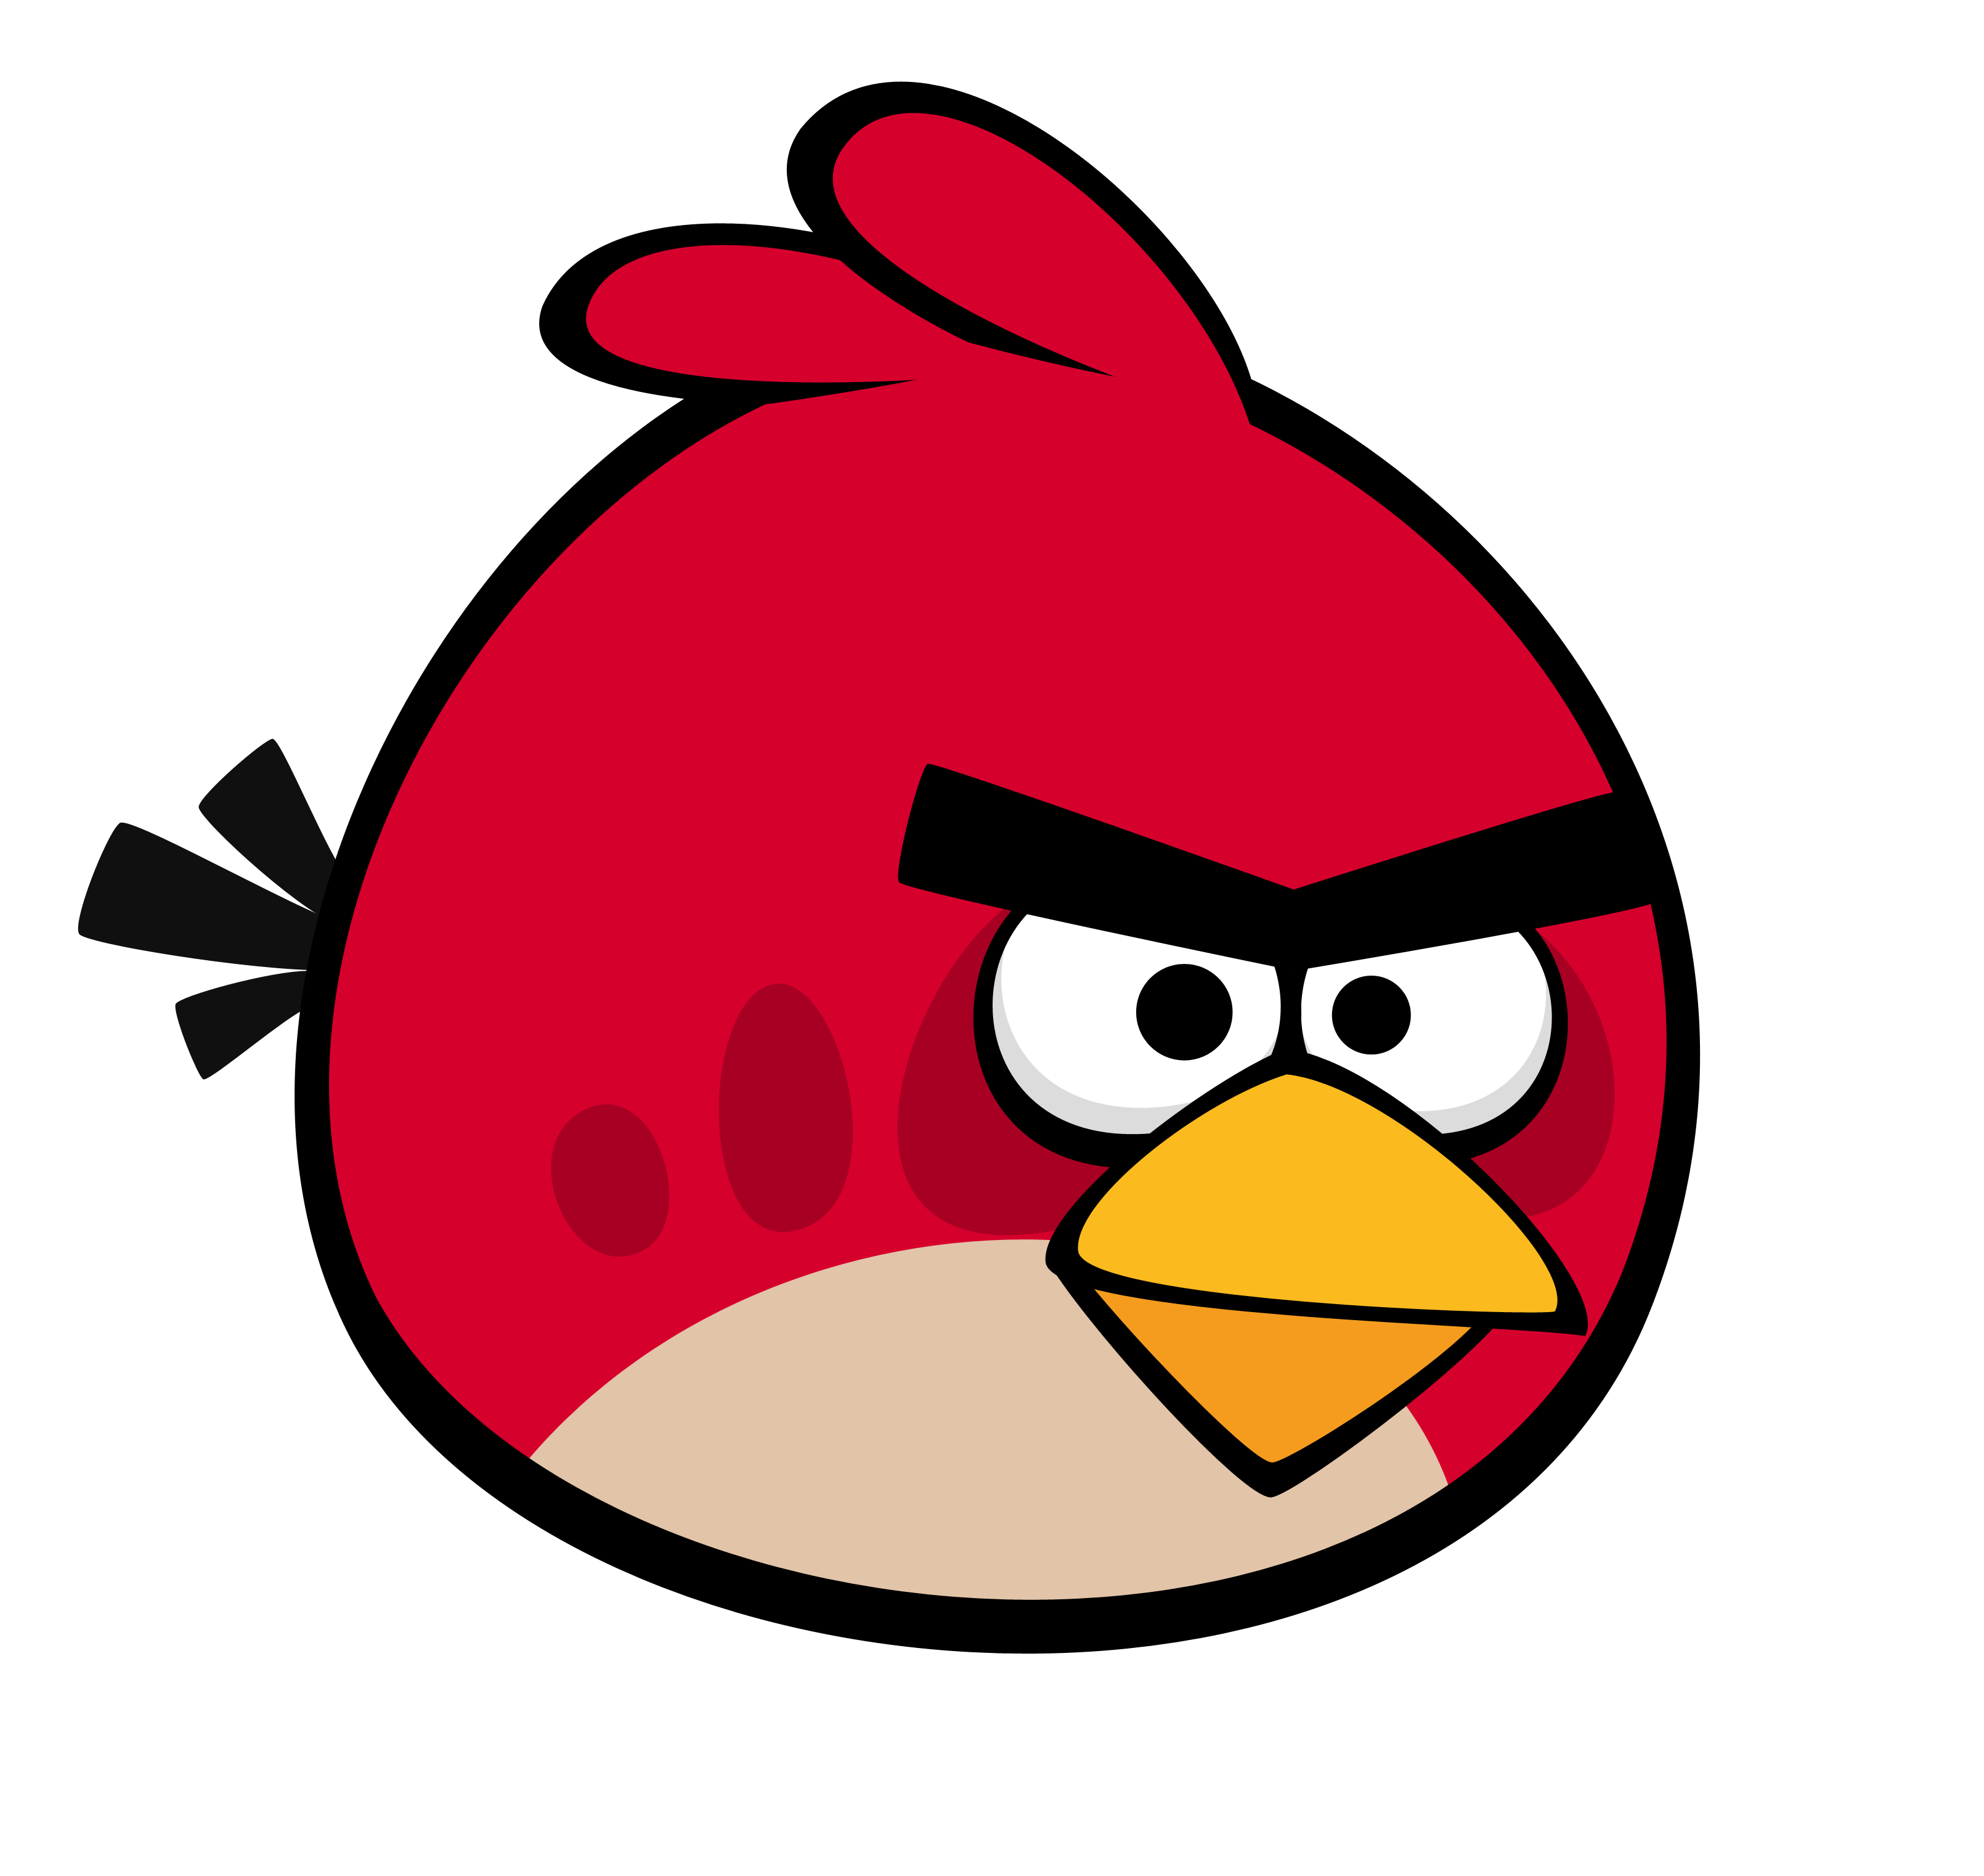 Angry Birds Hry